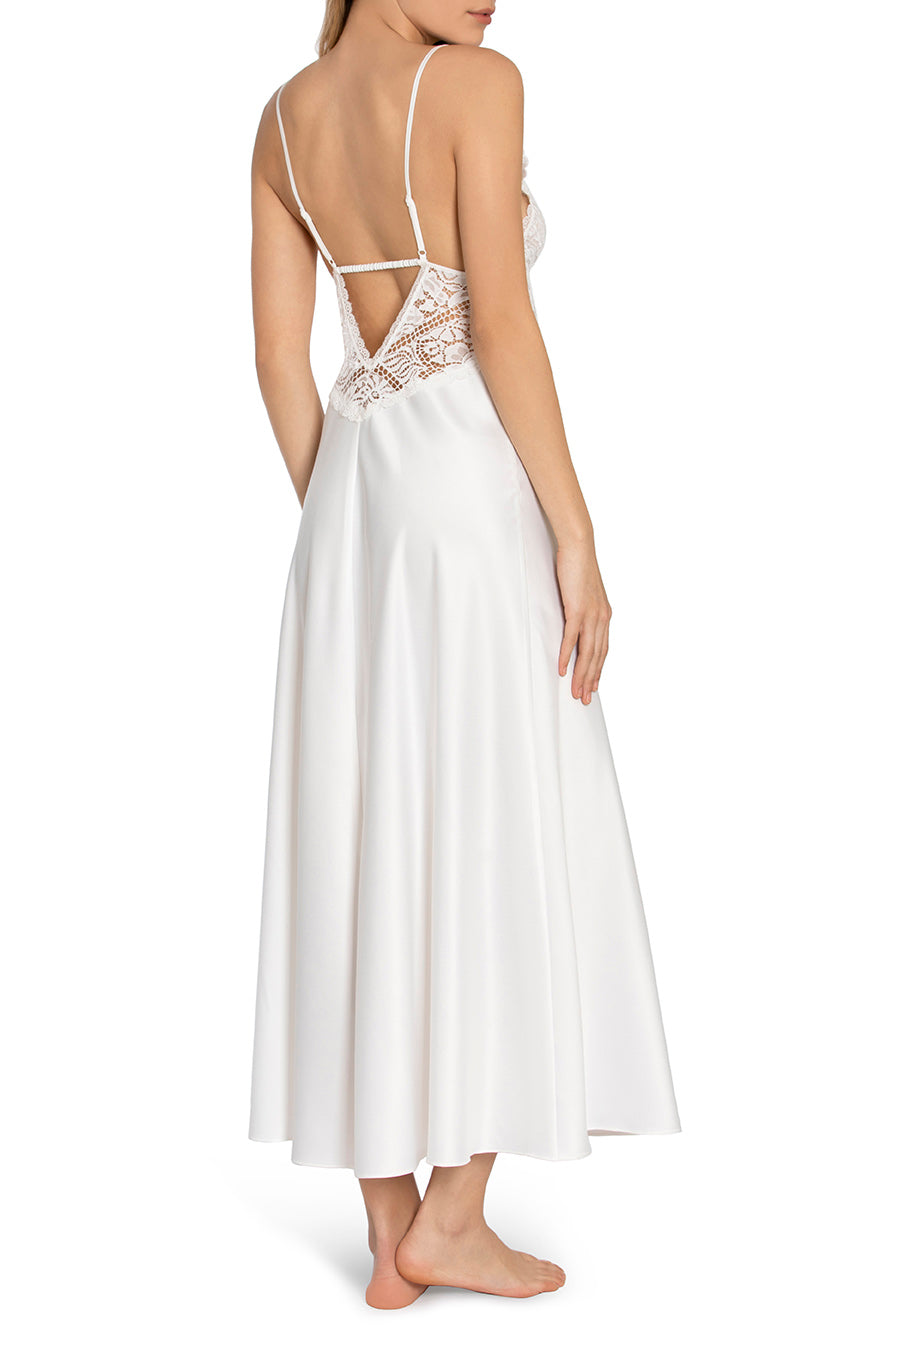 Jonquil Caterina Gown freeshipping - TrousseauOfDallas